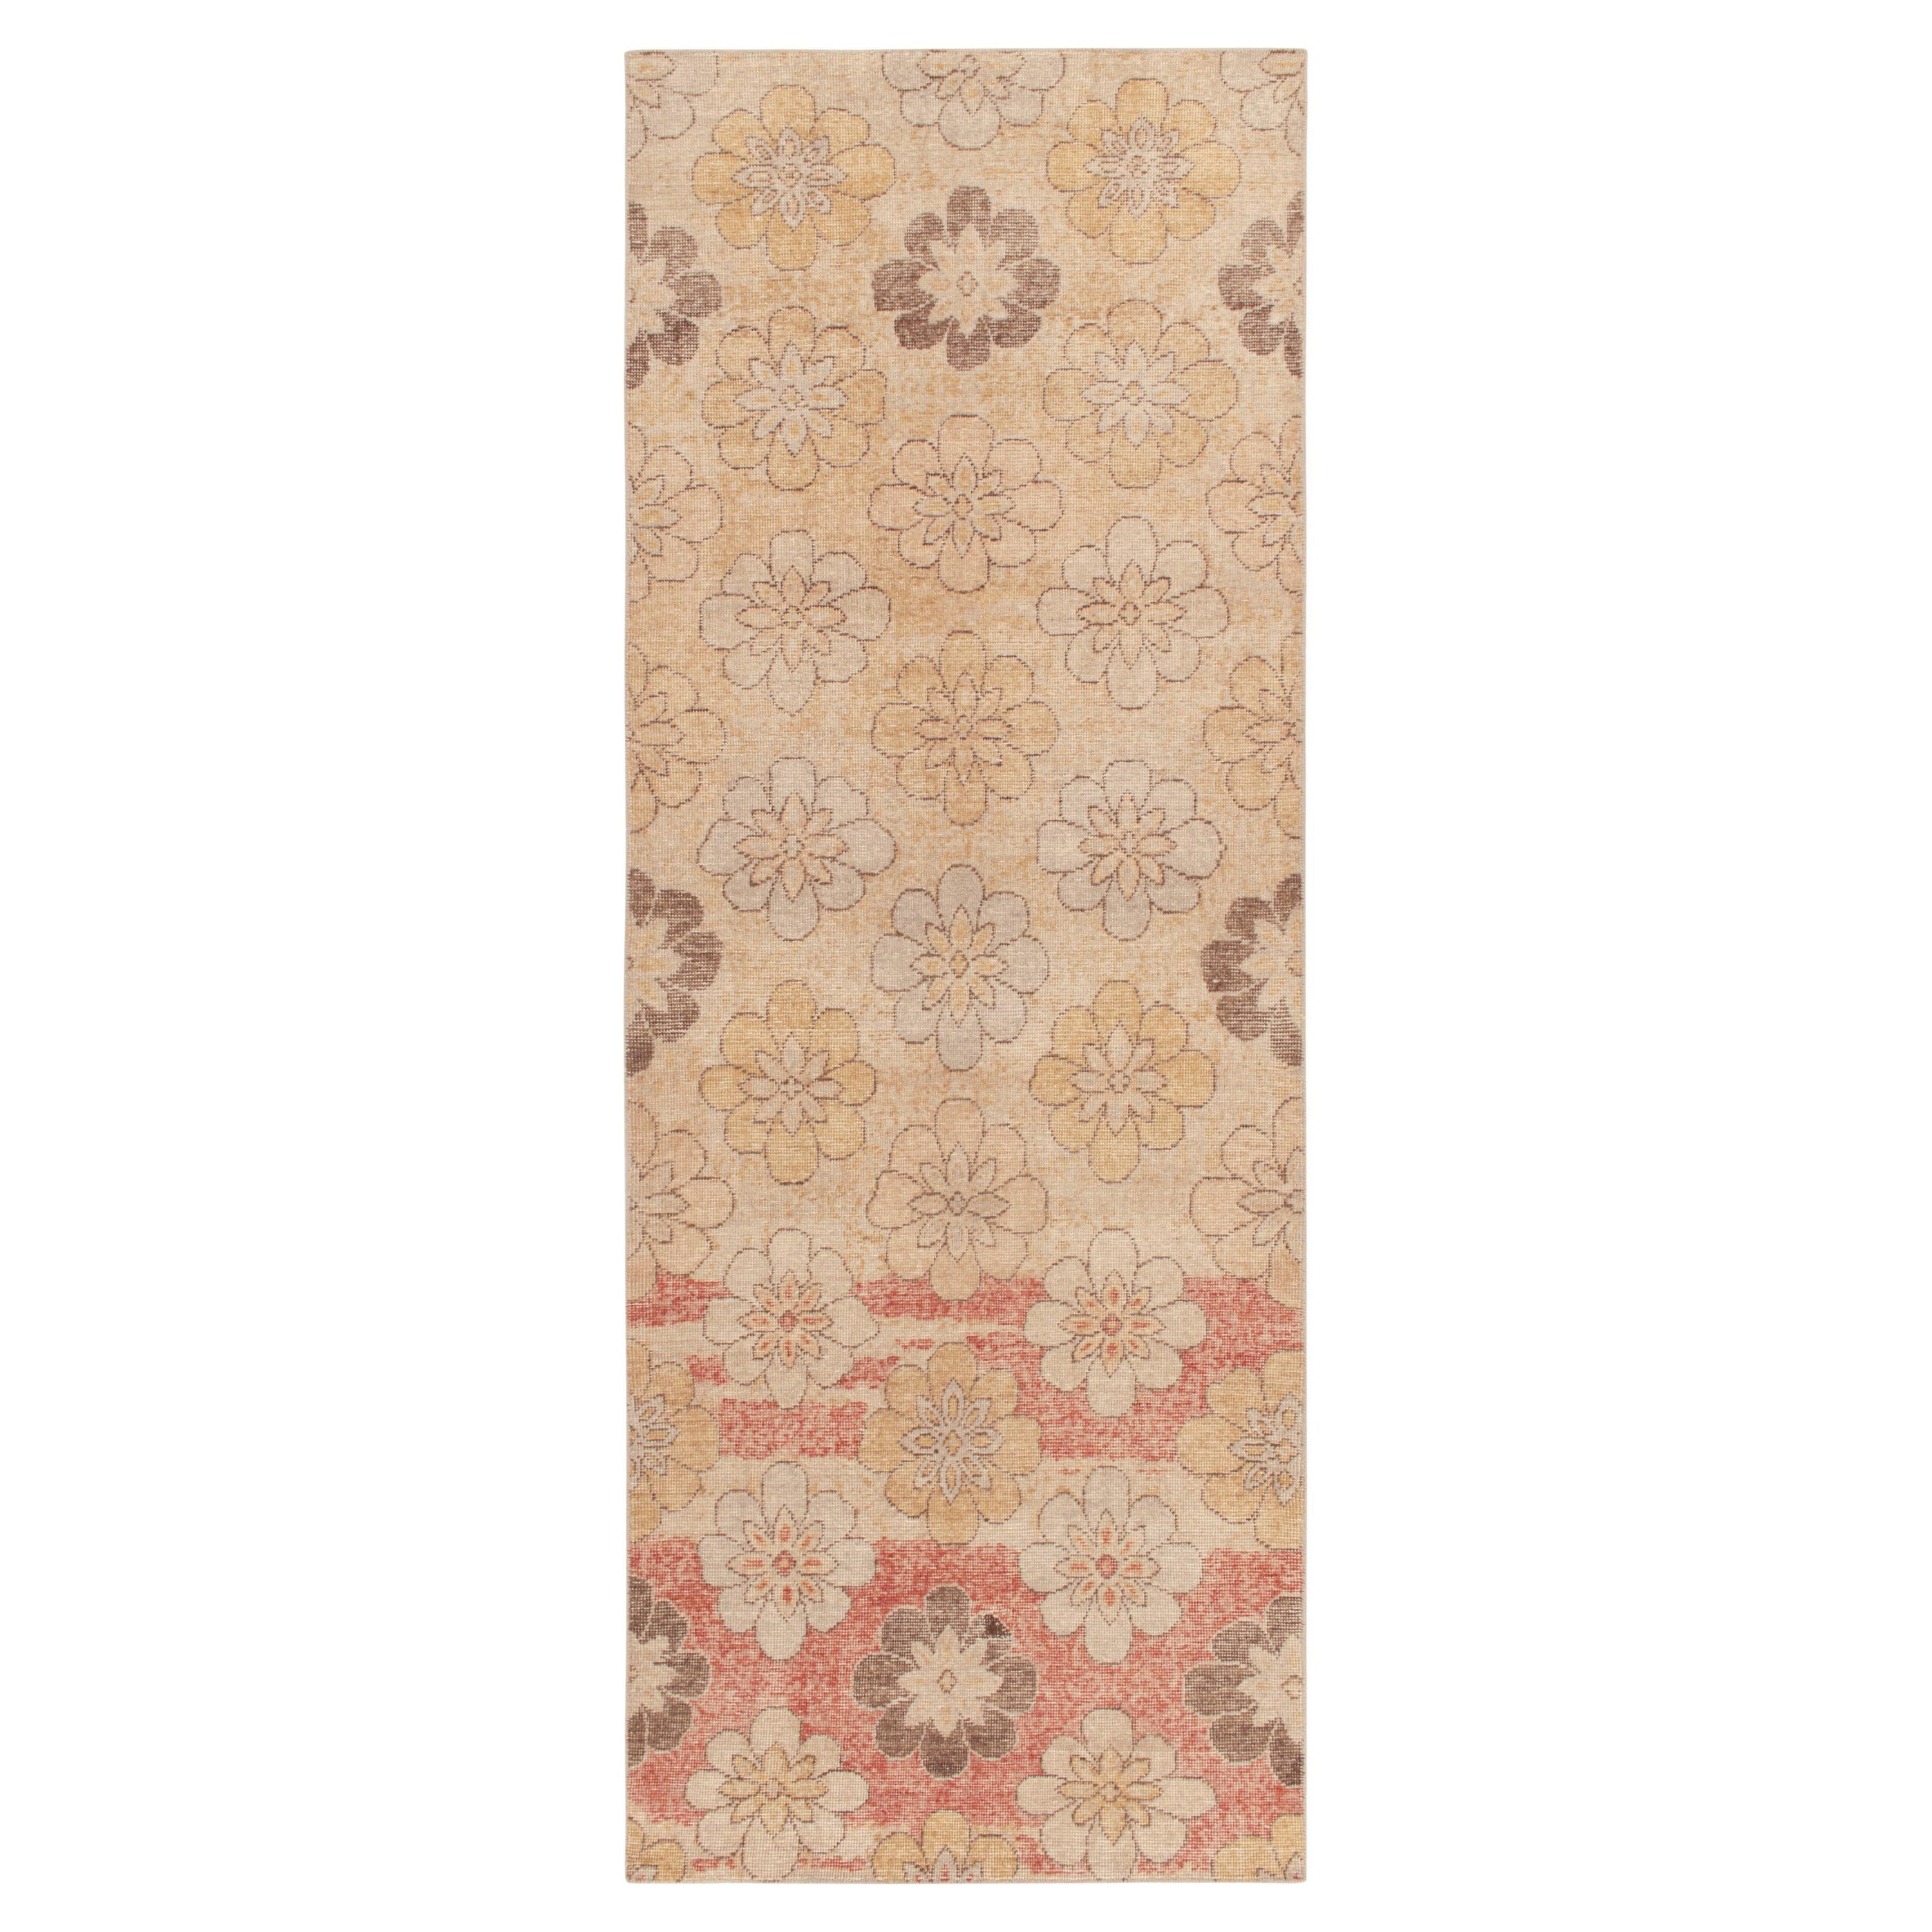 Rug & Kilim's Distressed 1960s Style Rug in Beige, Red & Blue Floral Patterns For Sale